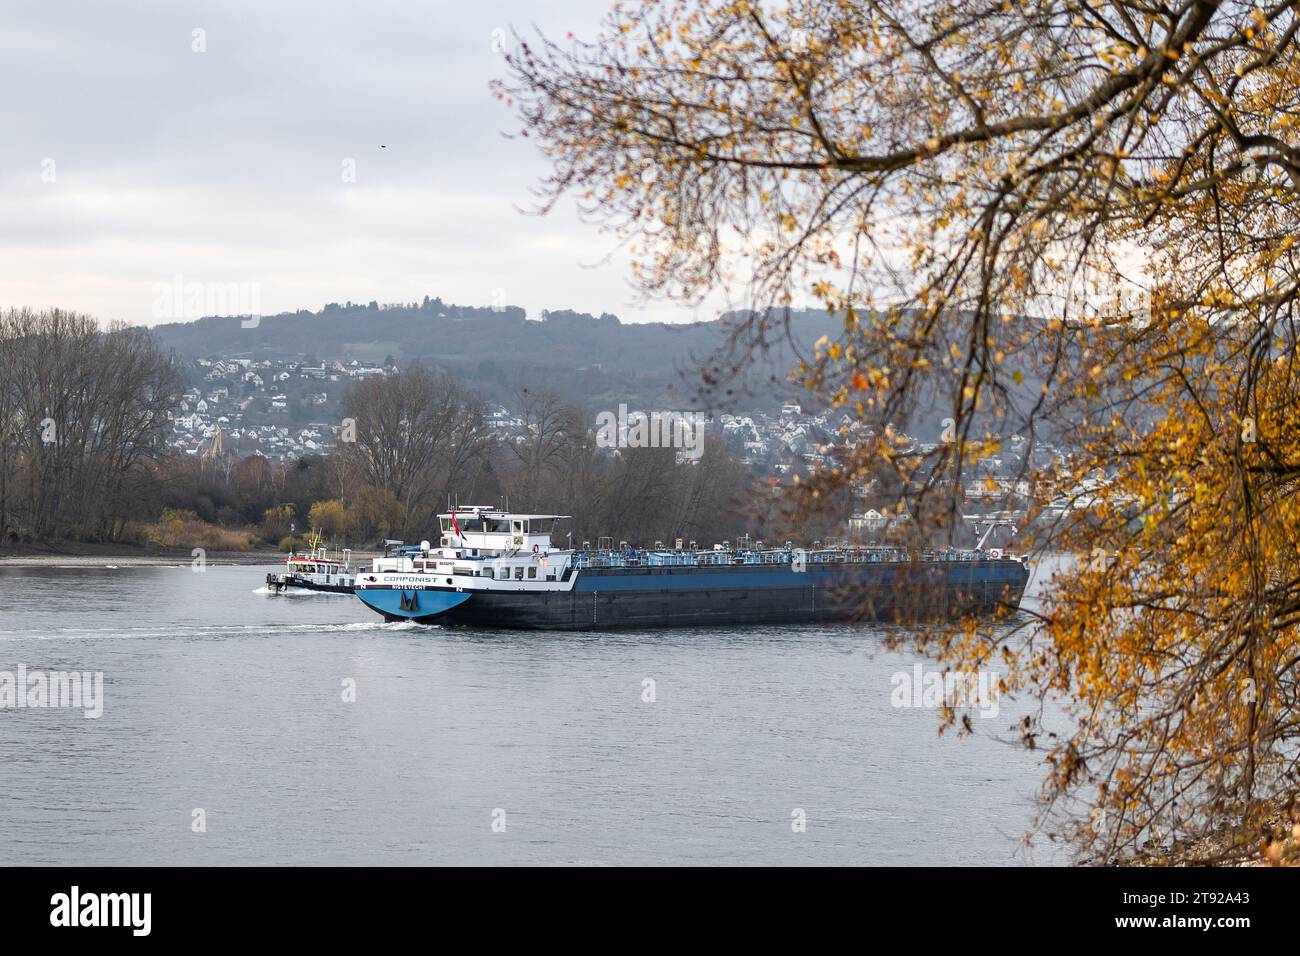 A small vessel passing a river barge on the river Rhine in autumn with branches with autumn foliage in the foreground Stock Photo